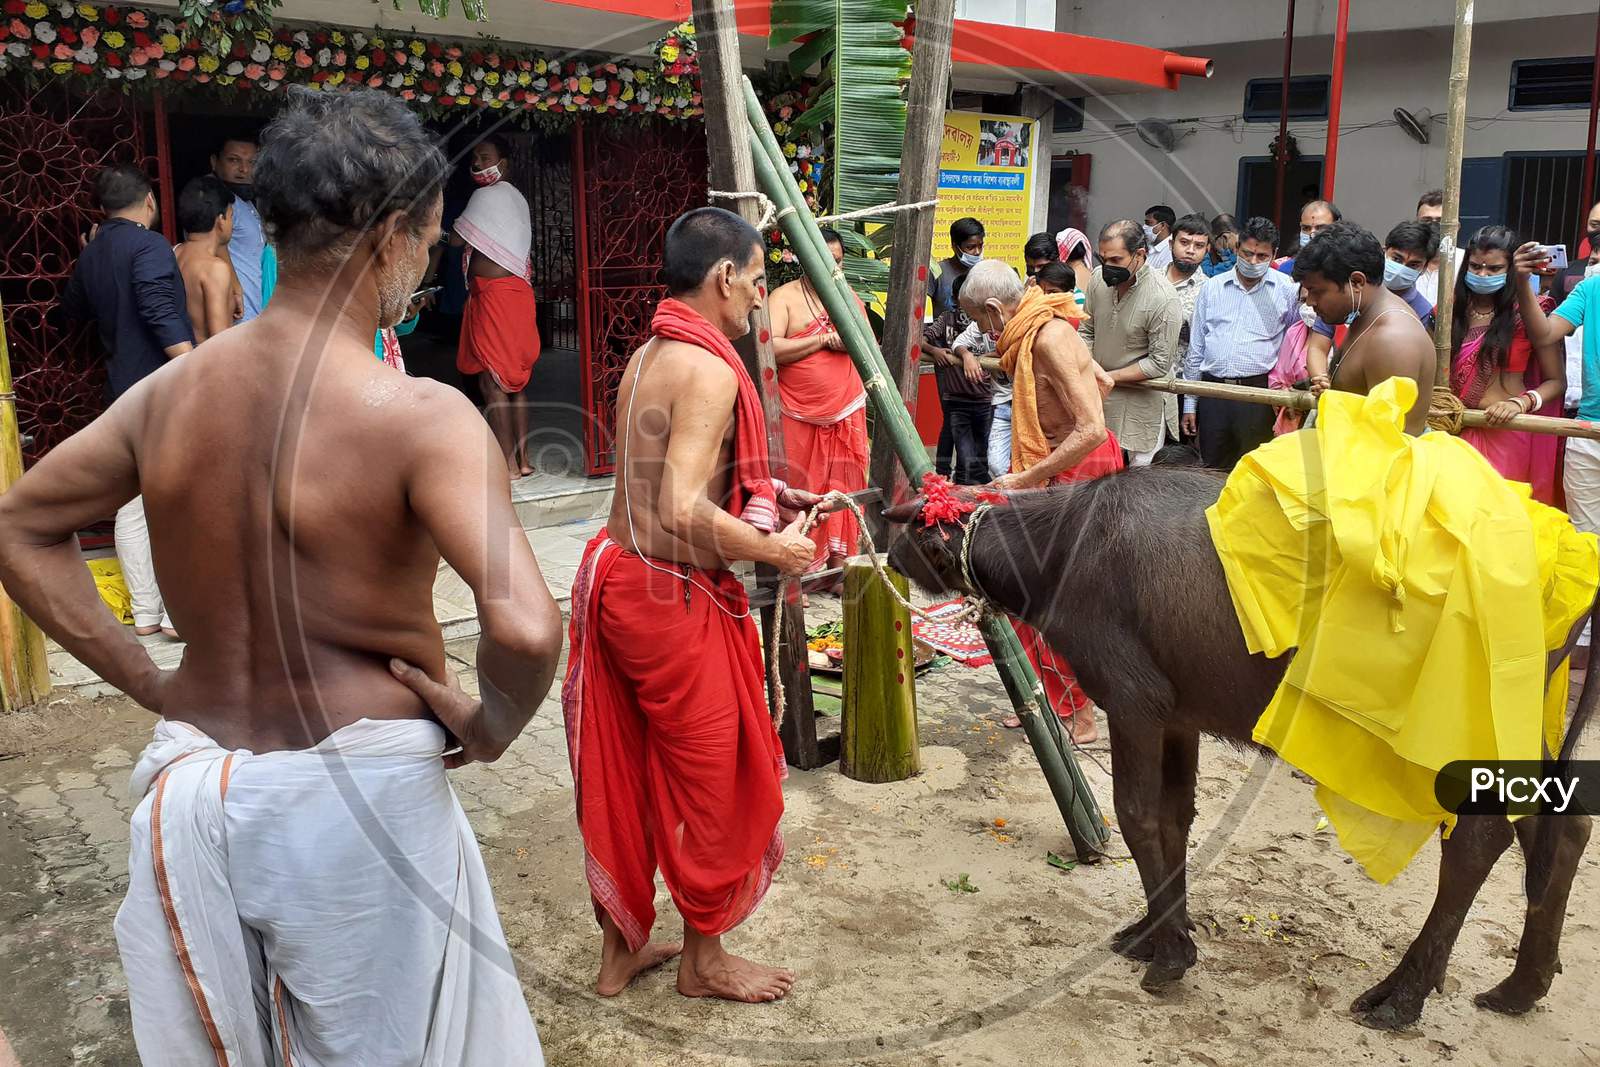 Hindu devotees prepare to sacrifice a buffalo as part of a ritual during the Durga Puja festival at a temple in Guwahati on oct 25,2020.